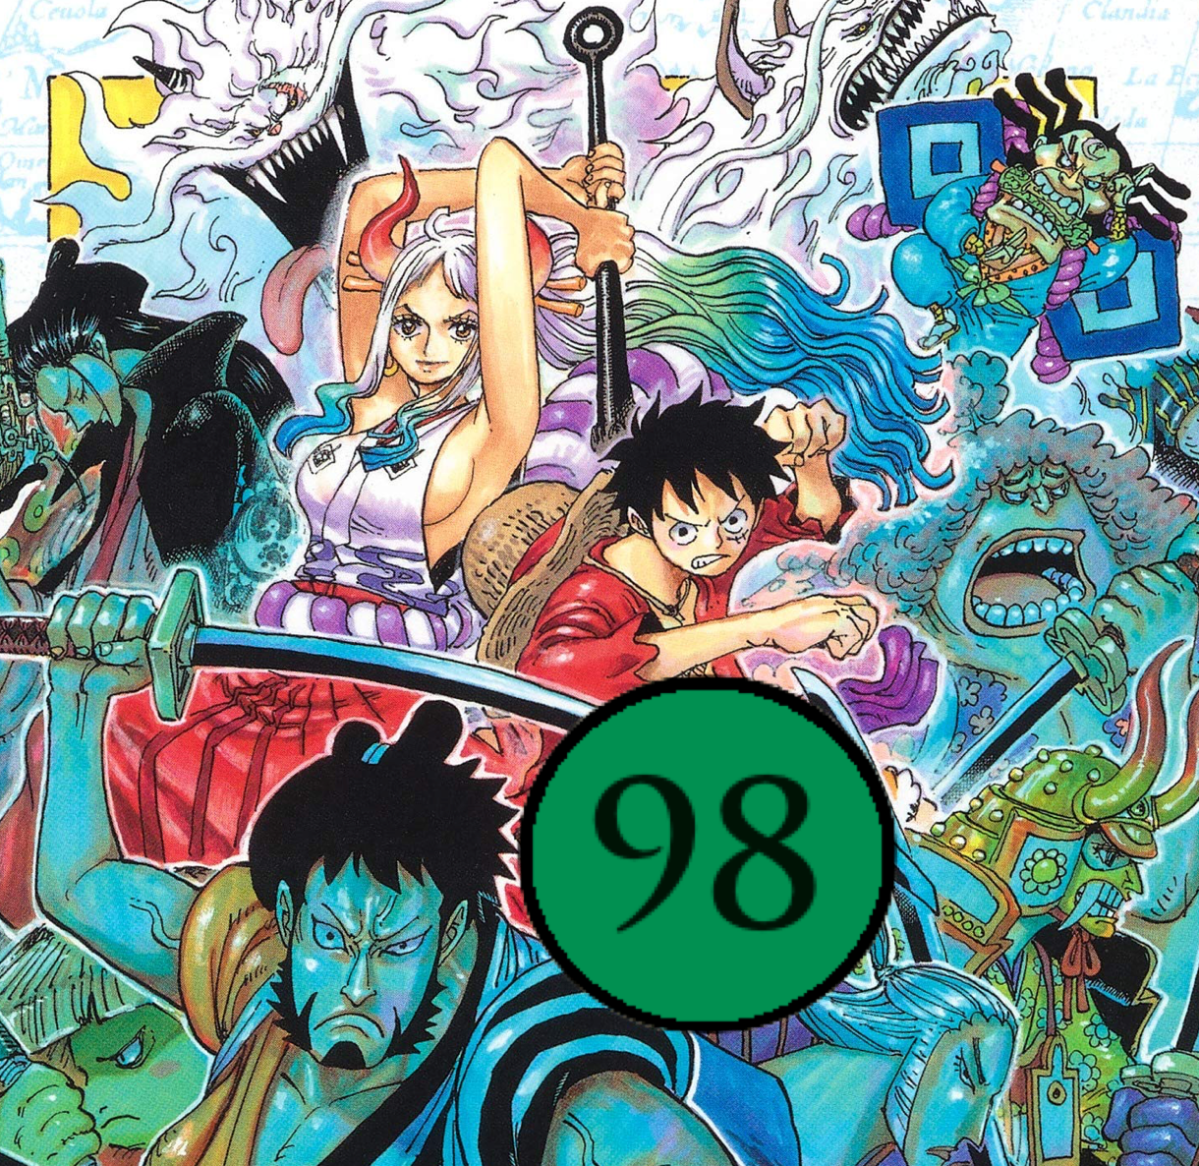 Volume 98 Sbs Question Corner The Library Of Ohara